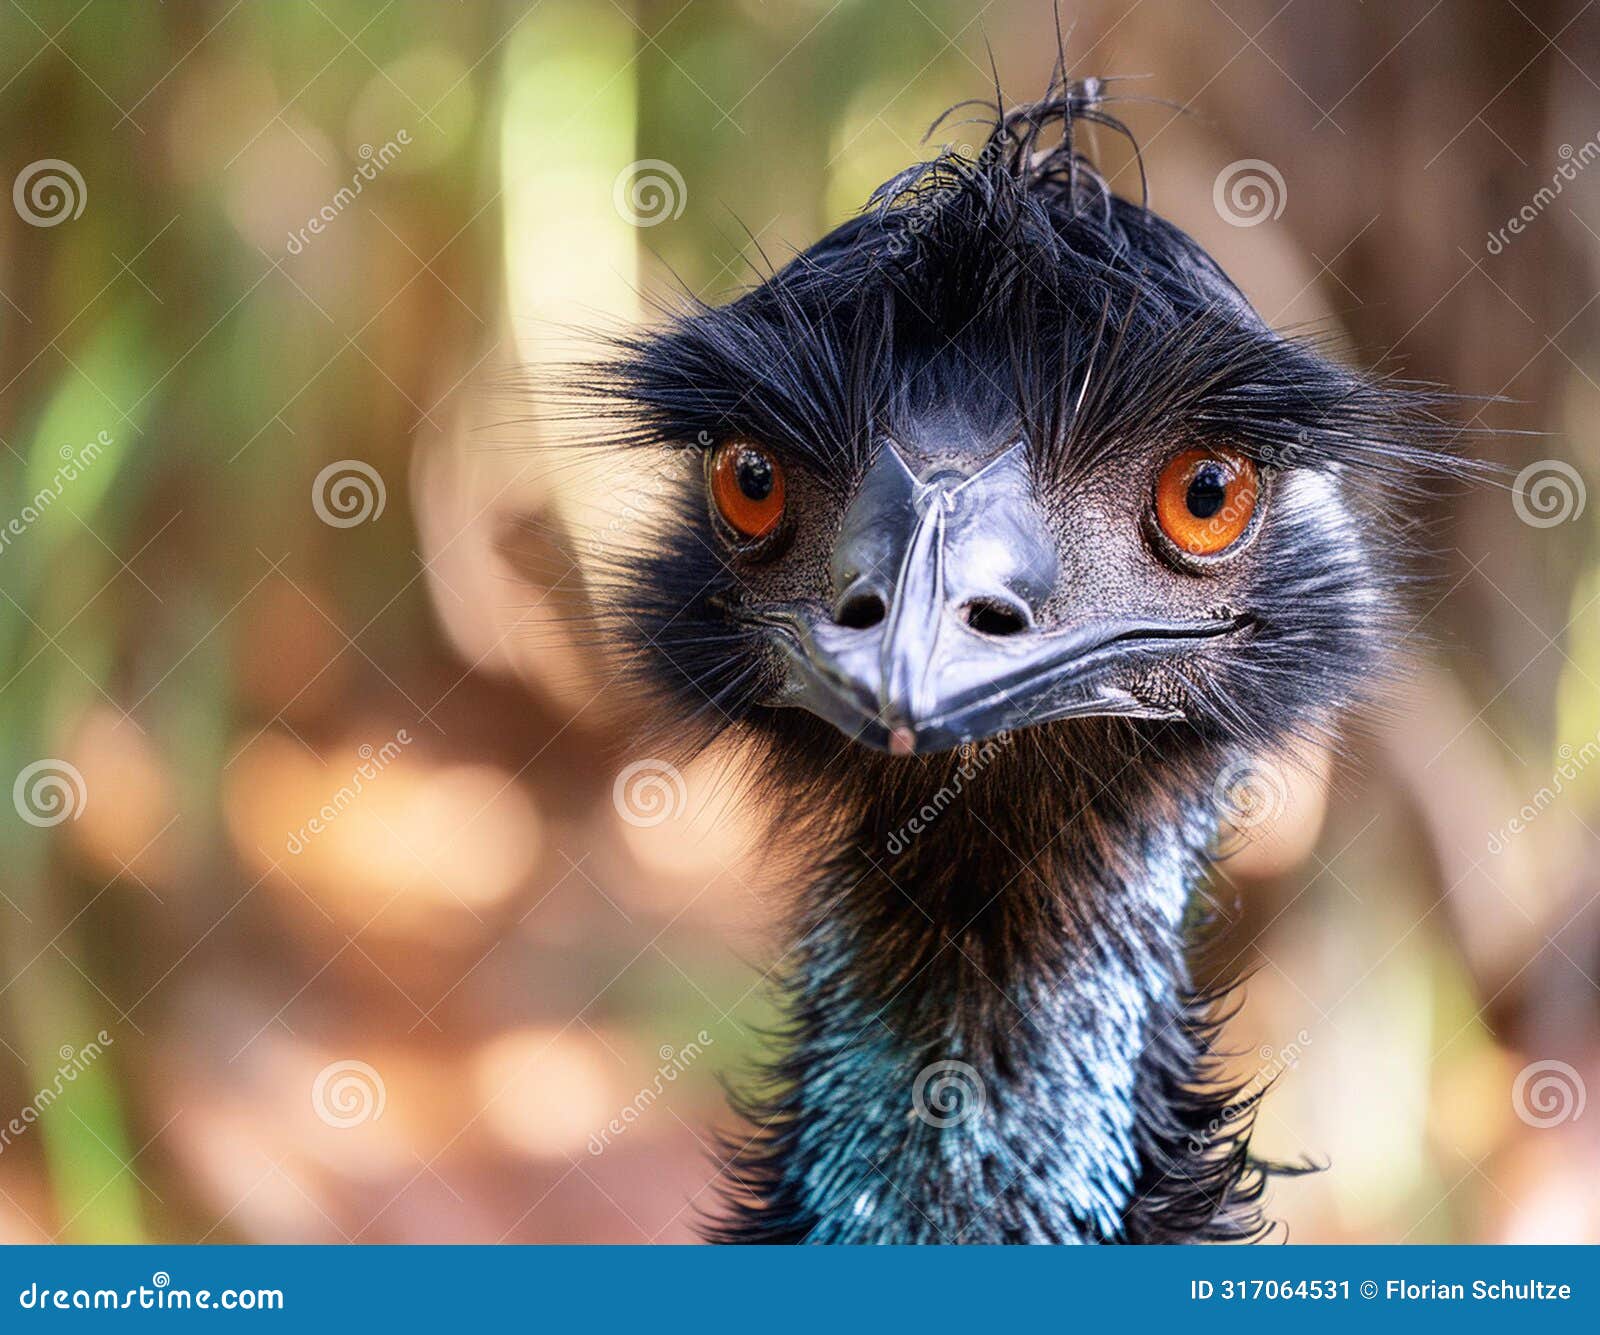 lose-up of an emu in natural habitat looking amused